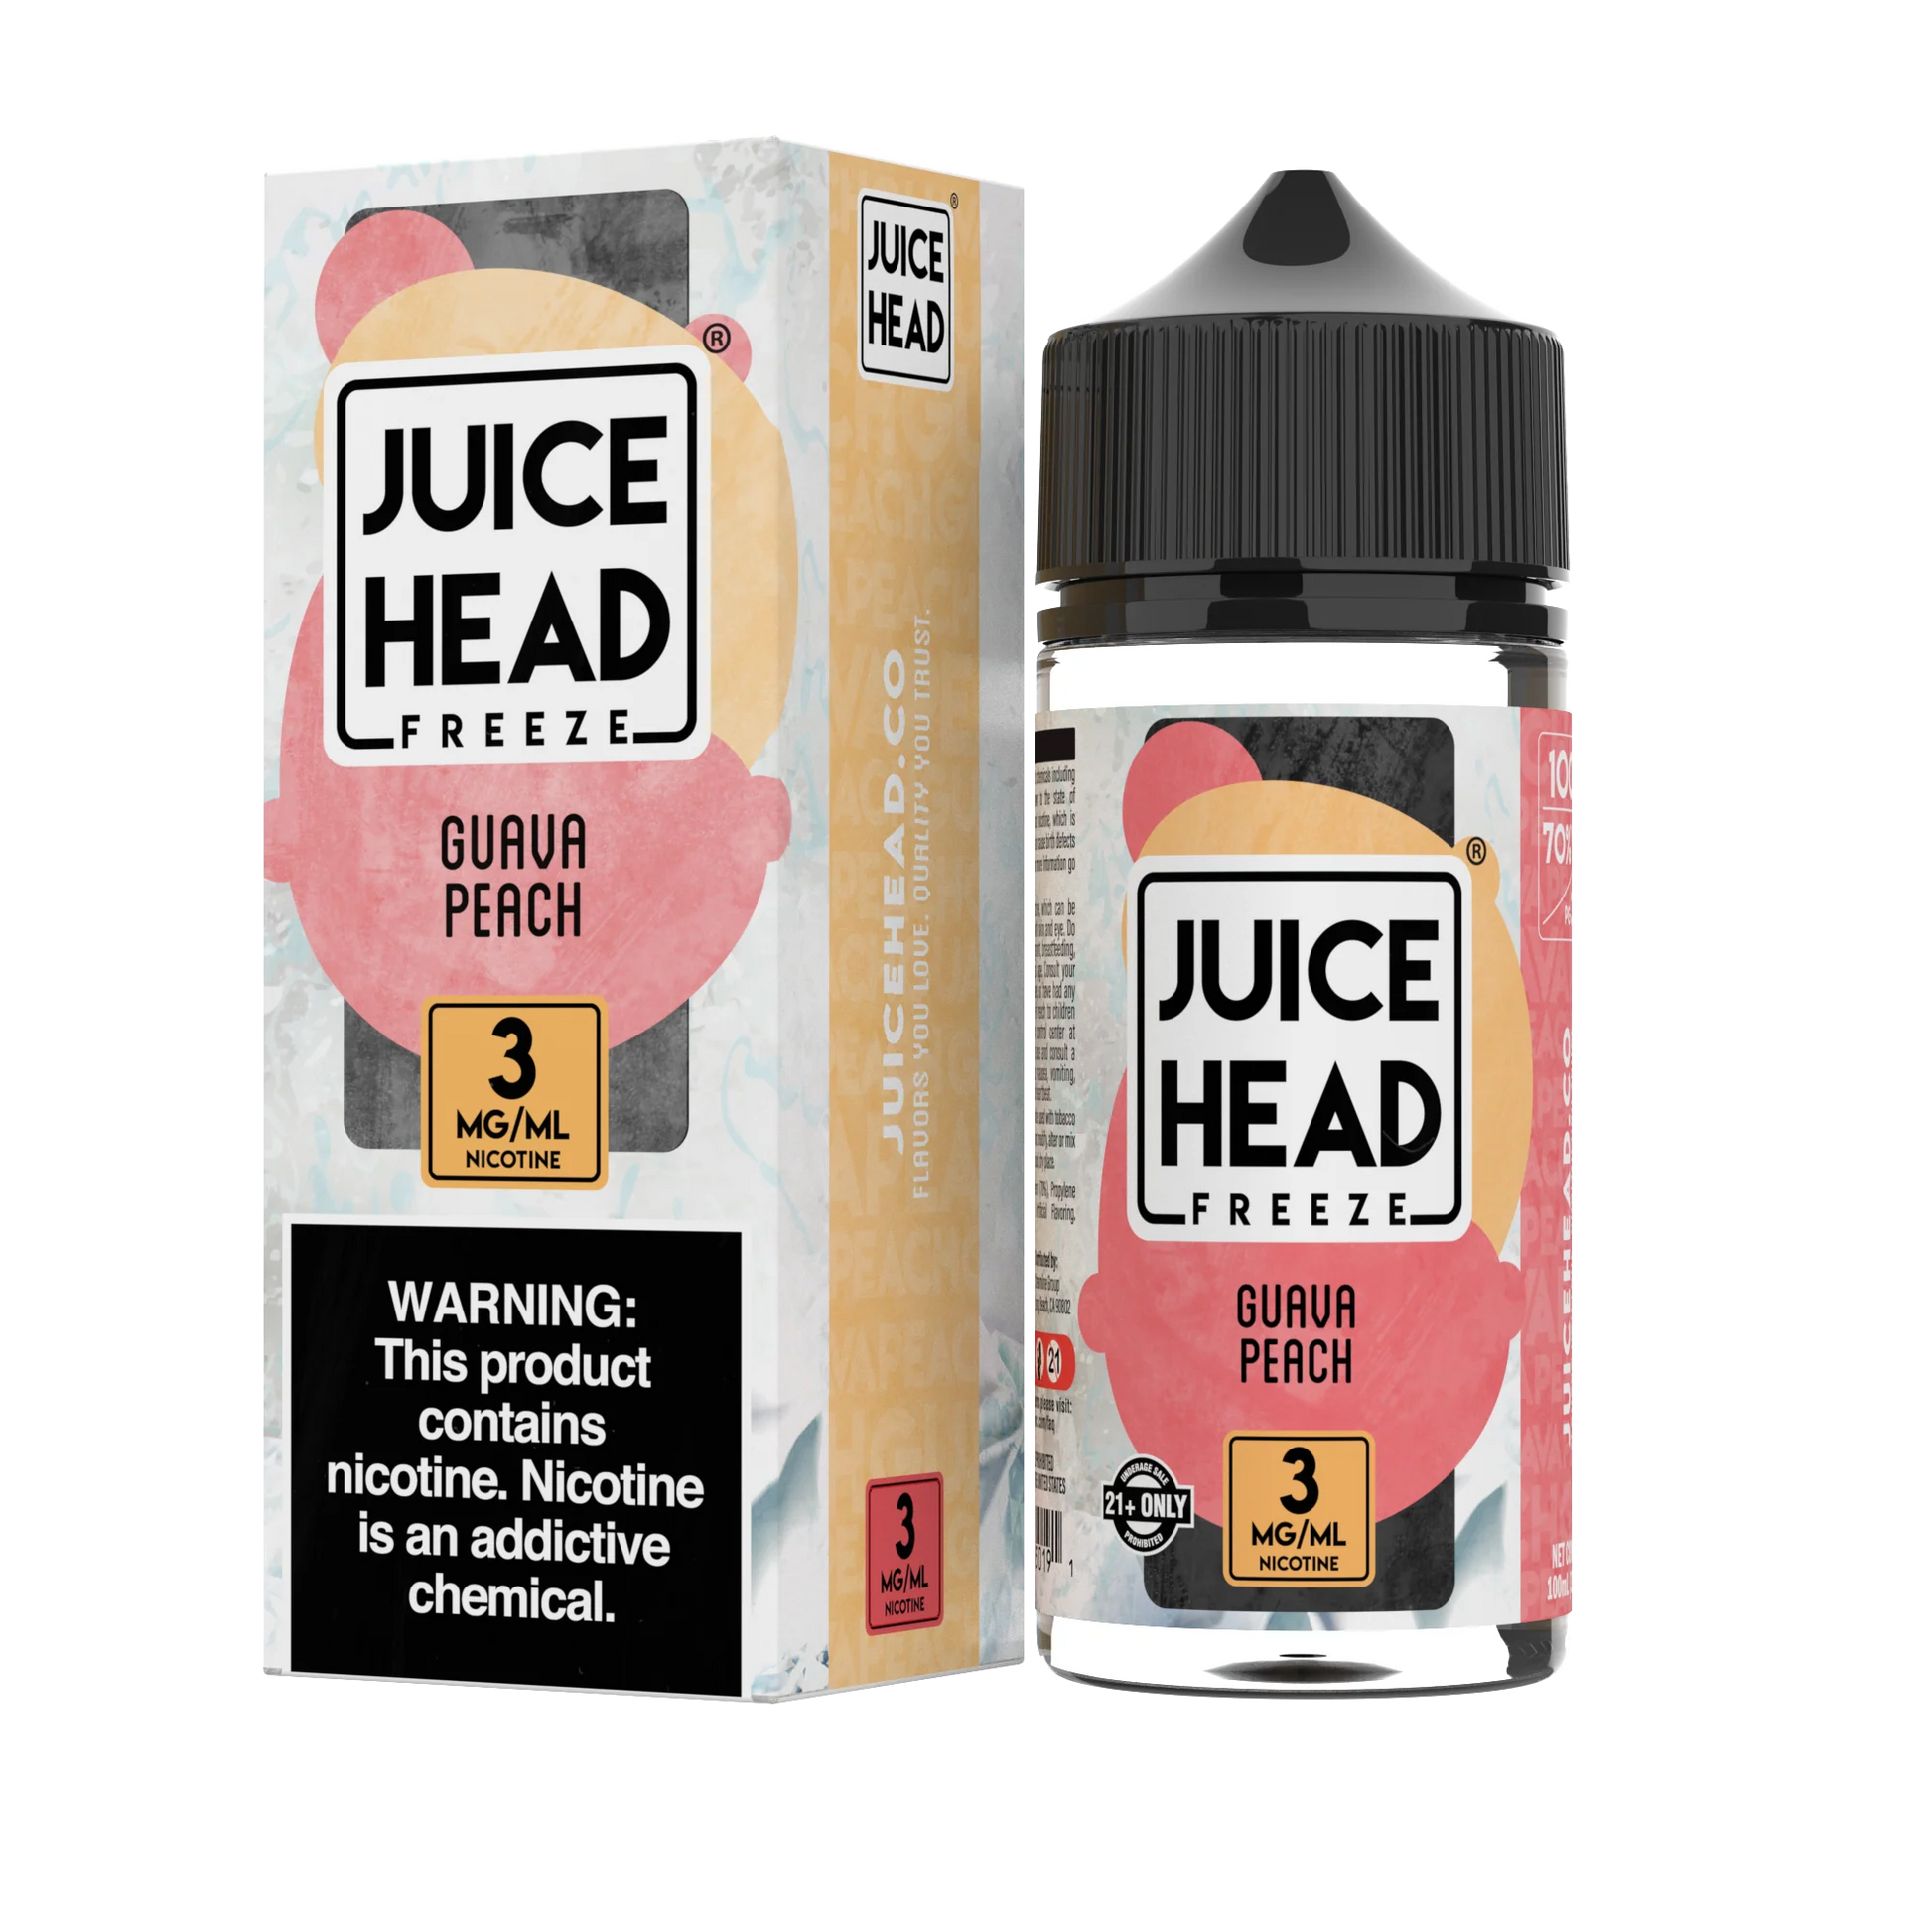 Juice Head 60mL 2PK Freeze Guava Peach with Packaging